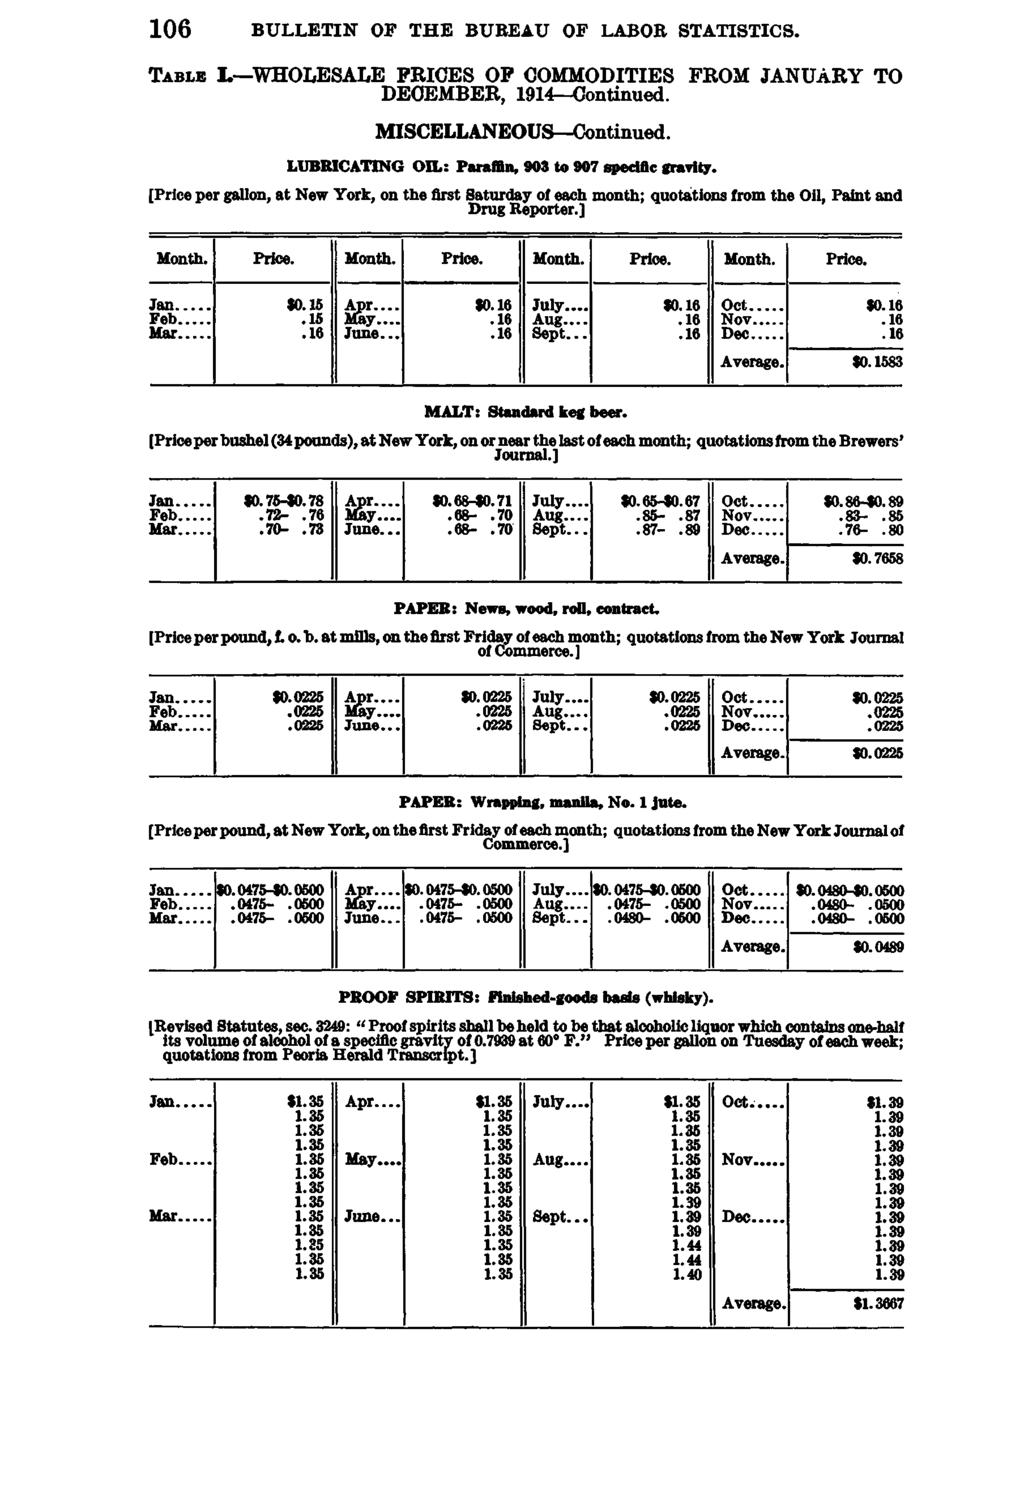 106 BULLETIN OF THE BUREAU OF LABOR STATISTICS. Table L WHOLESALE PRICES OP COMMODITIES FROM JANUARY TO DECEMBER, 1914 Continued. MISCELLANEOUS Continued.